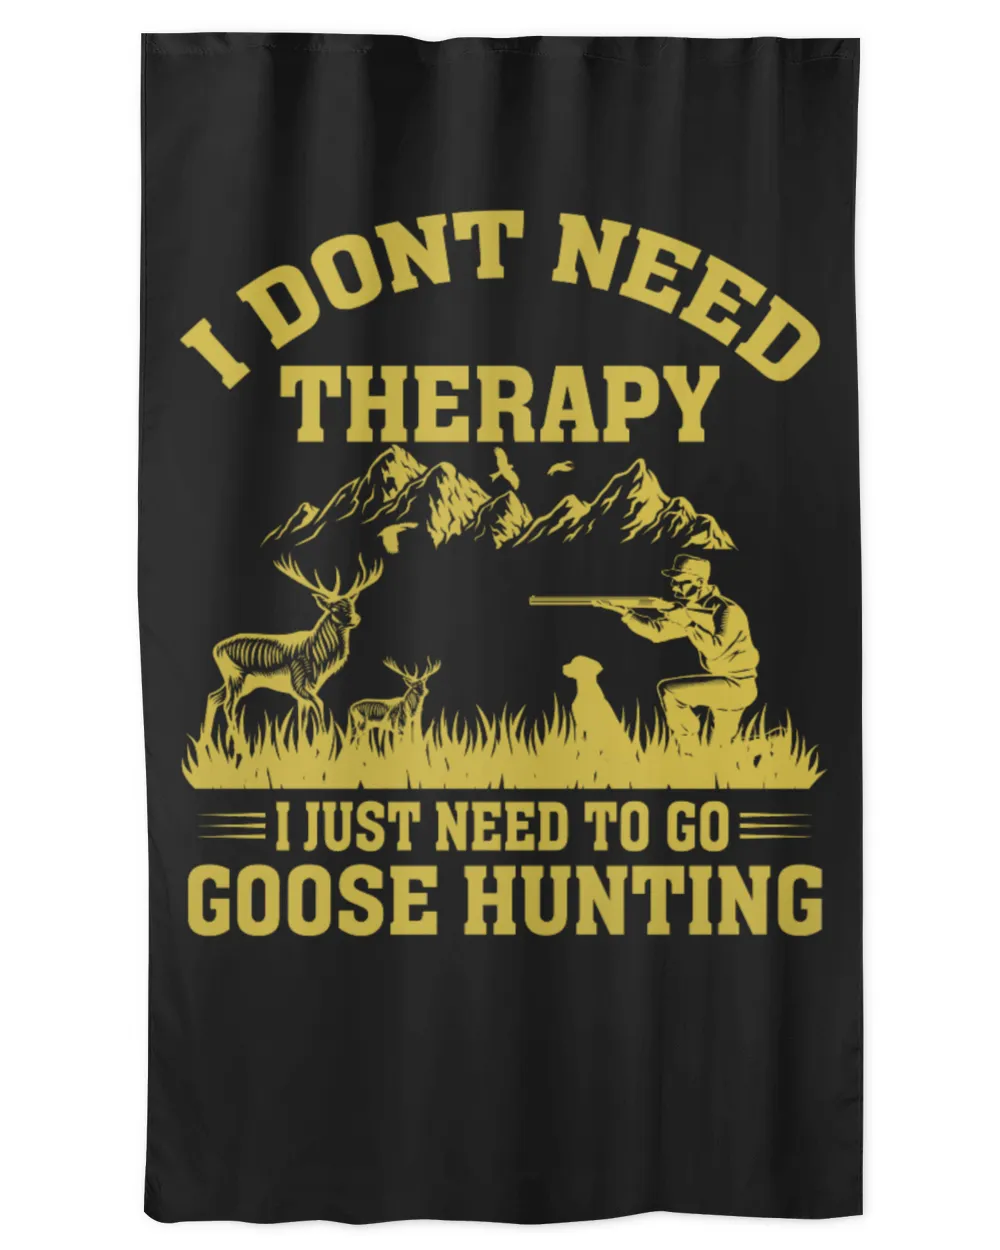 I Don't Need Therapy I Just Need To Go Goose Hunting